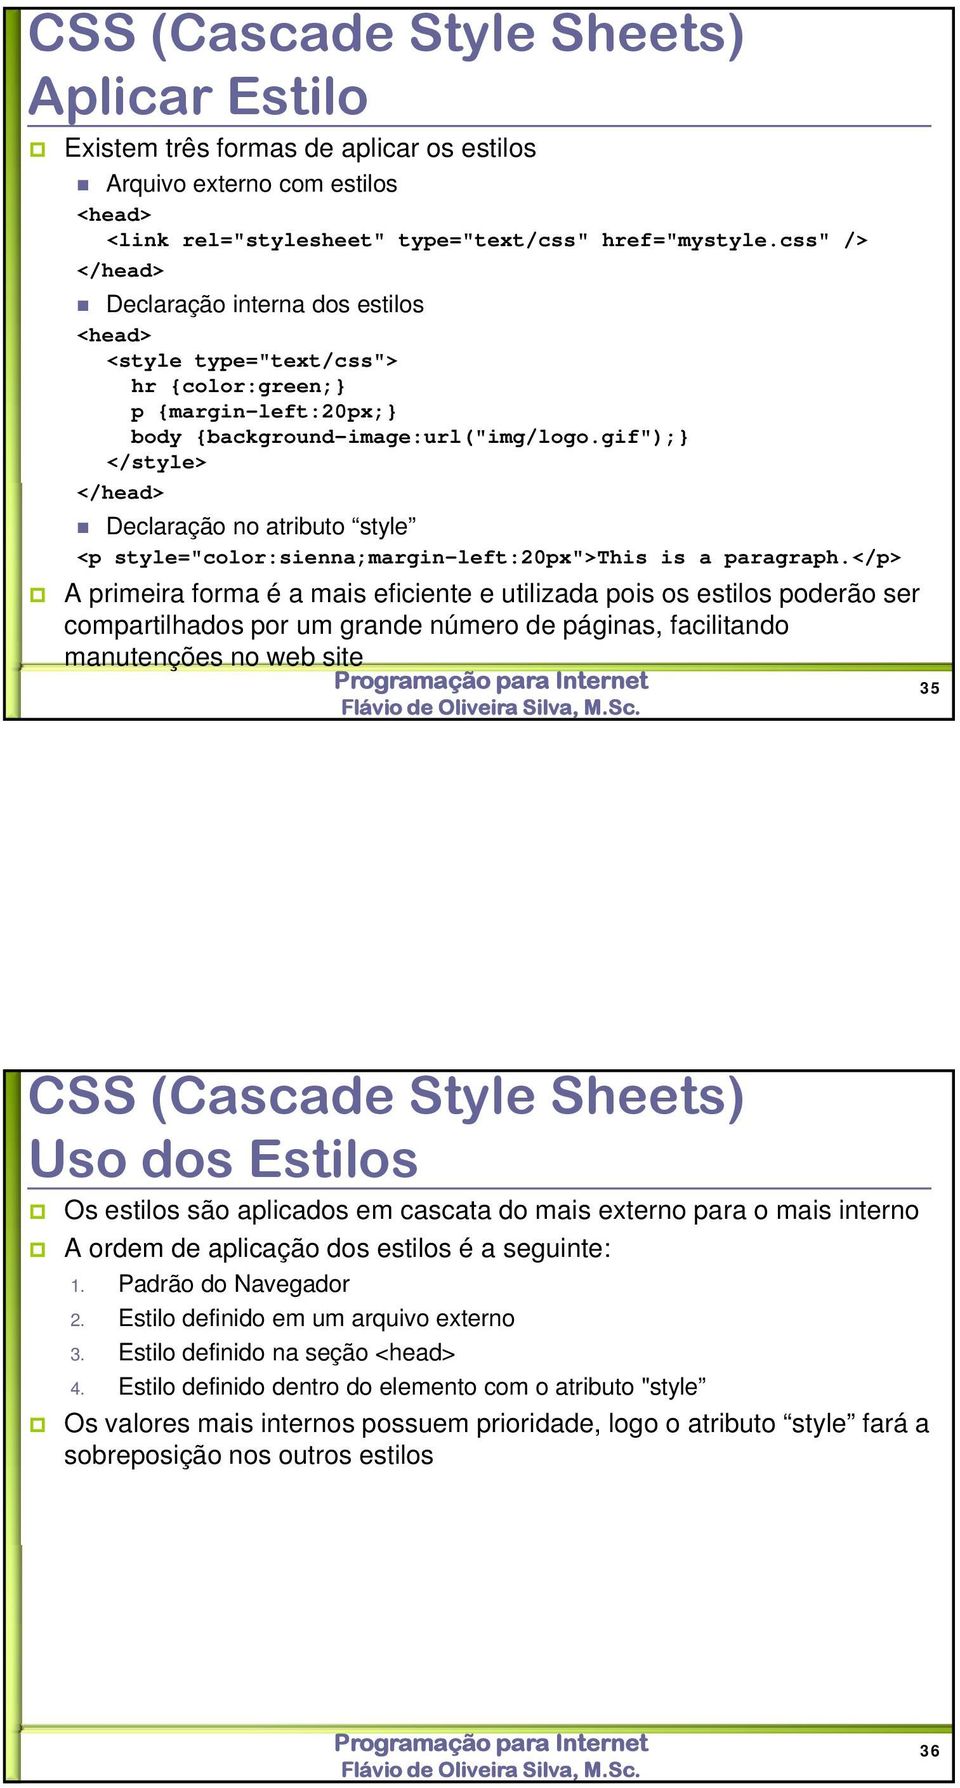 gif"); </style> </head> Declaração no atributo style <p style="color:sienna;margin-left:20px">this is a paragraph.